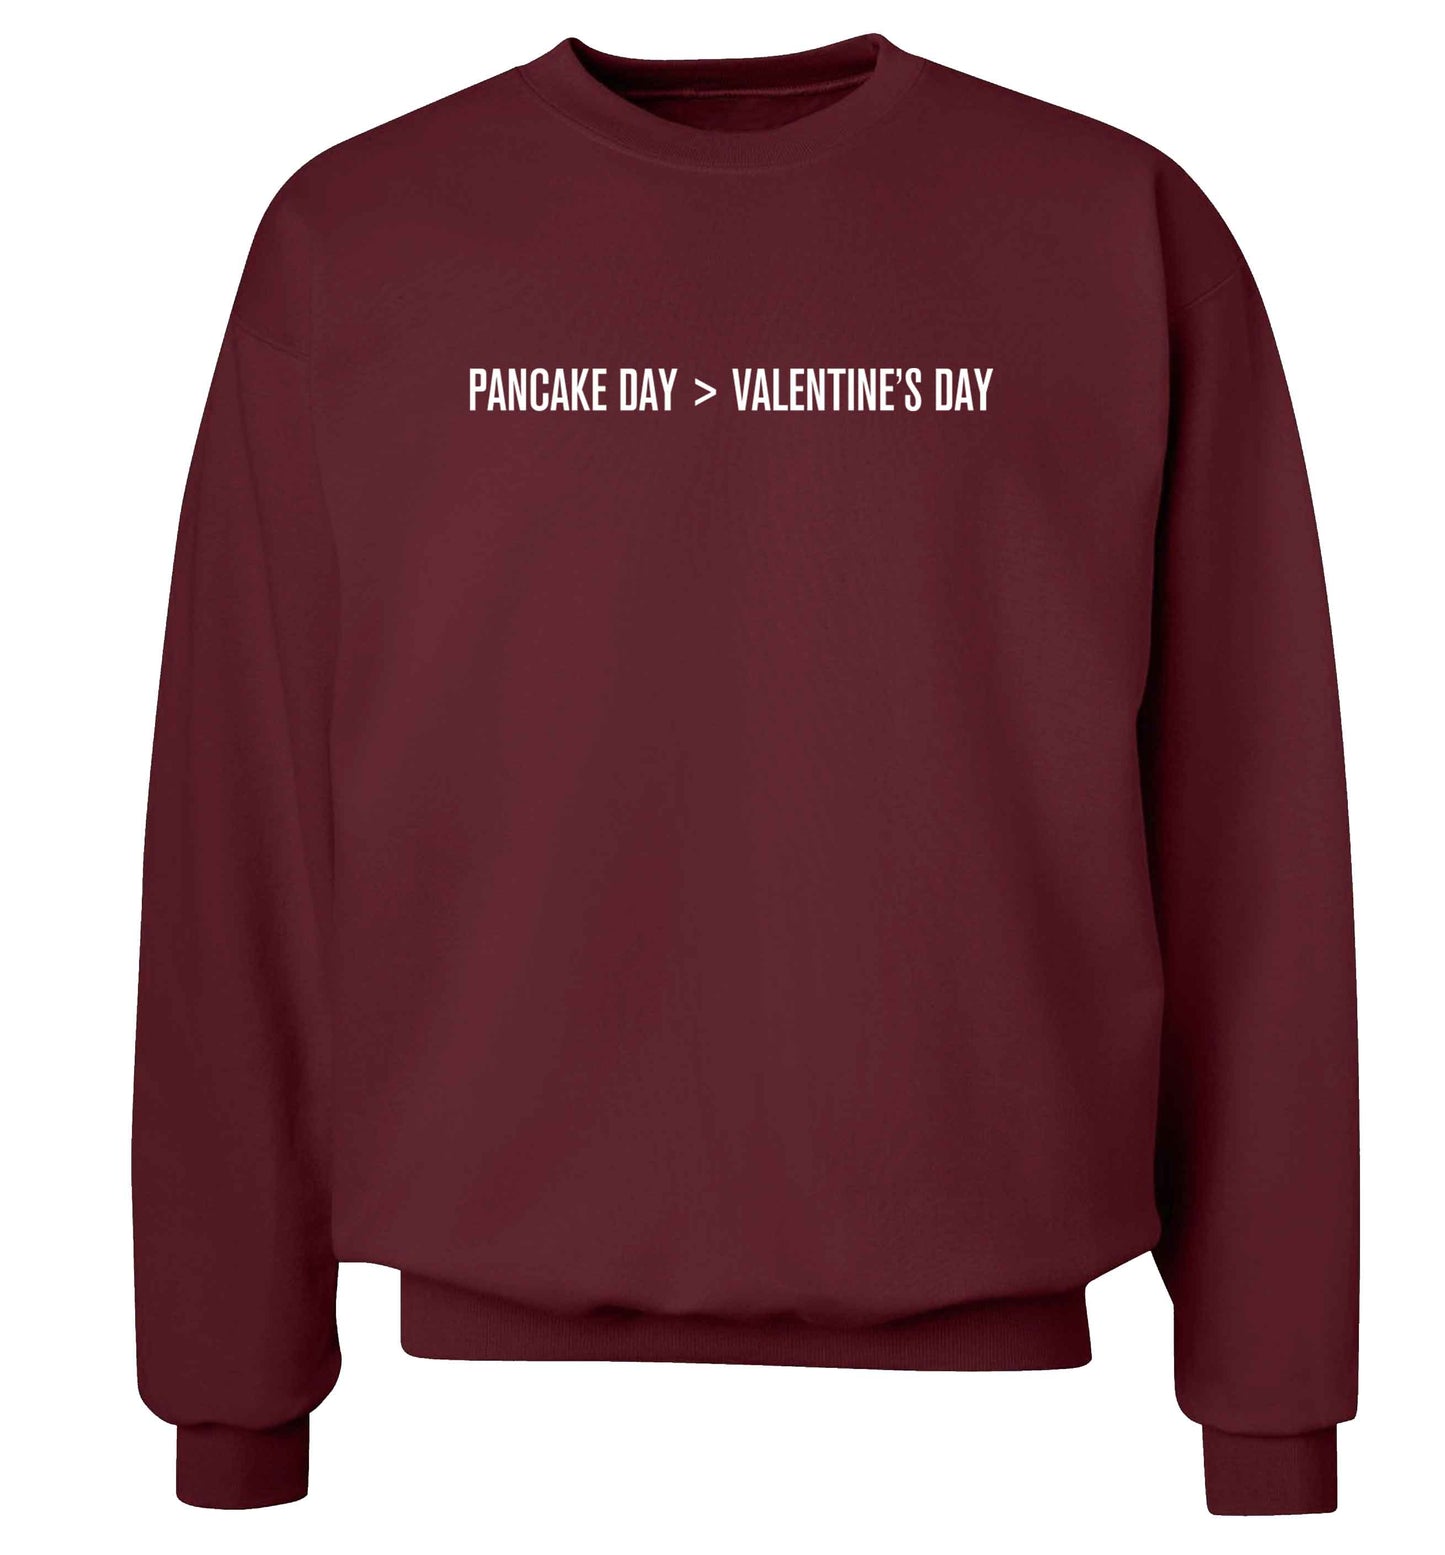 Pancake day > valentines day adult's unisex maroon sweater 2XL